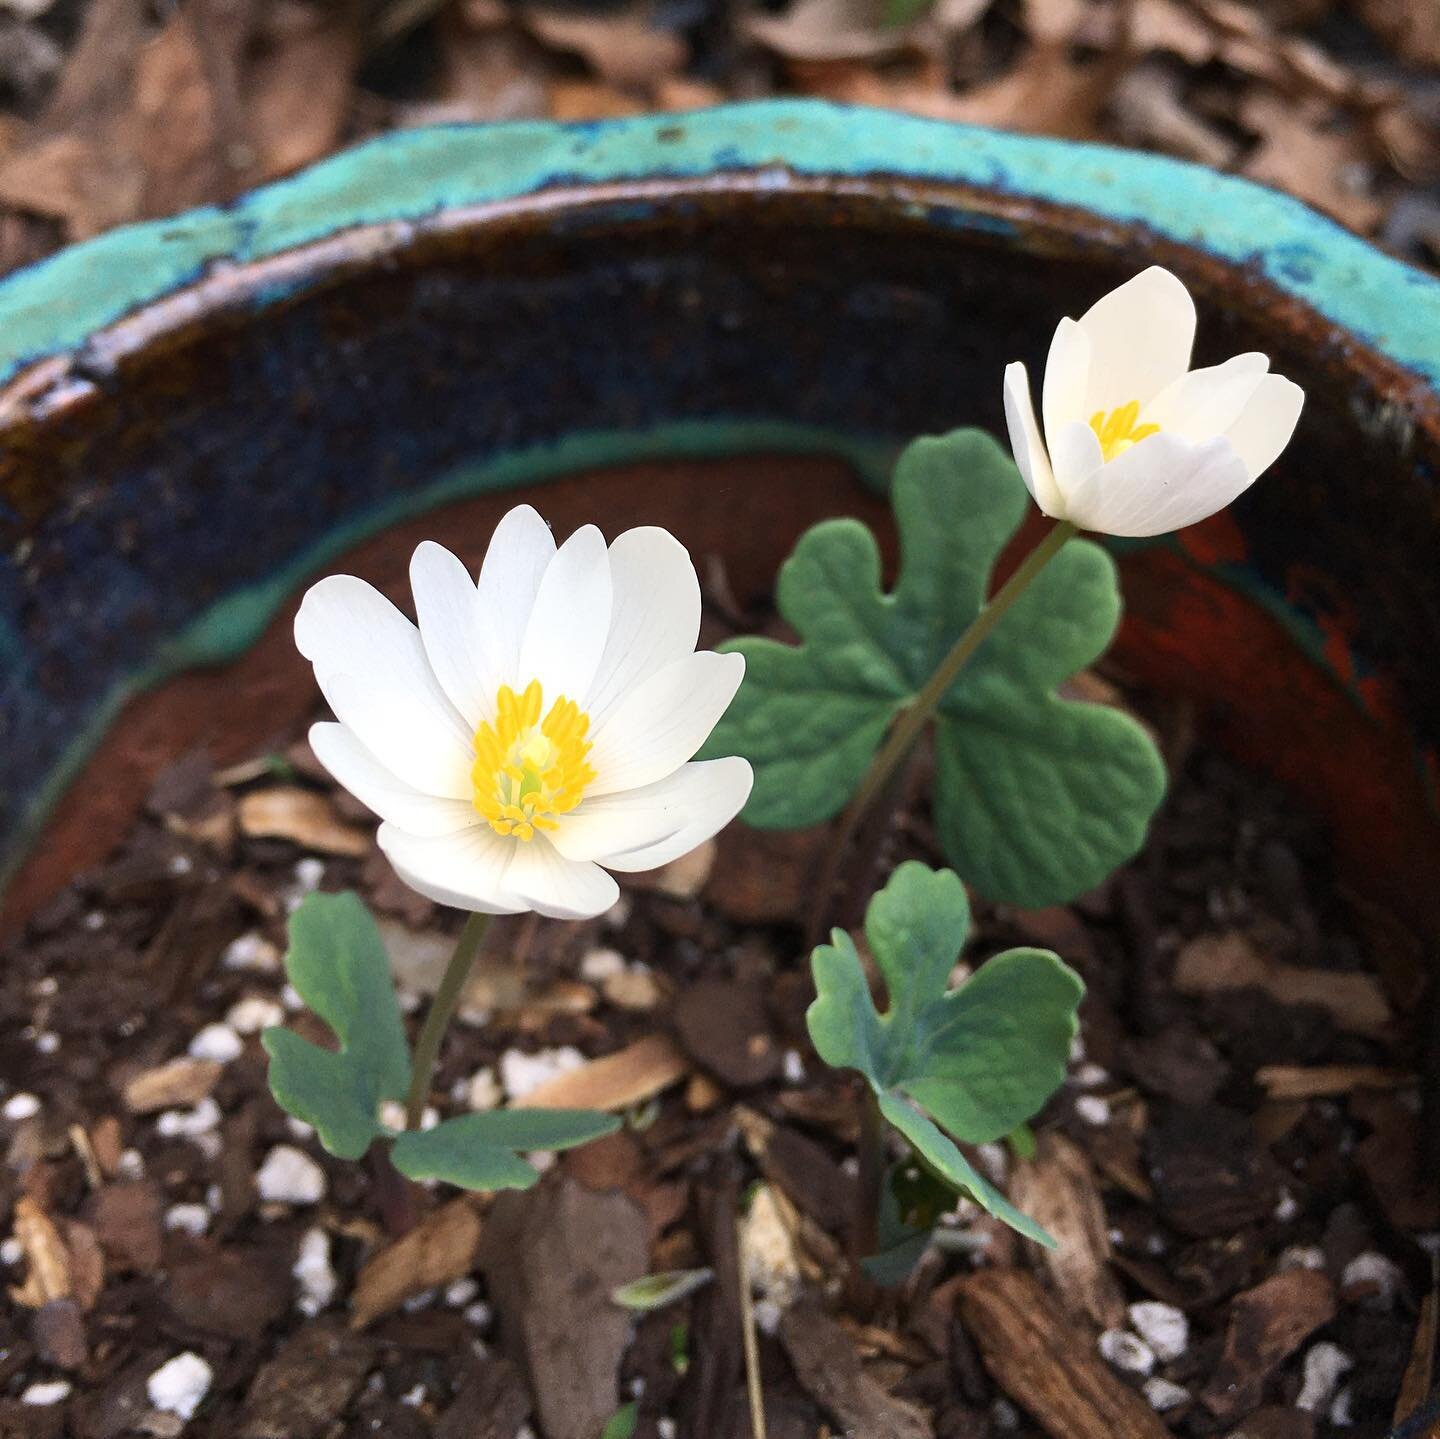 I&rsquo;ve been waiting all year 🥺💘Bloodroot (Sanguinaria canadensis) 
_____
#bloodroot #nativeplants #plantnatives #Sanguinariacanadensis #georgianativeplants #pottedplantgarden